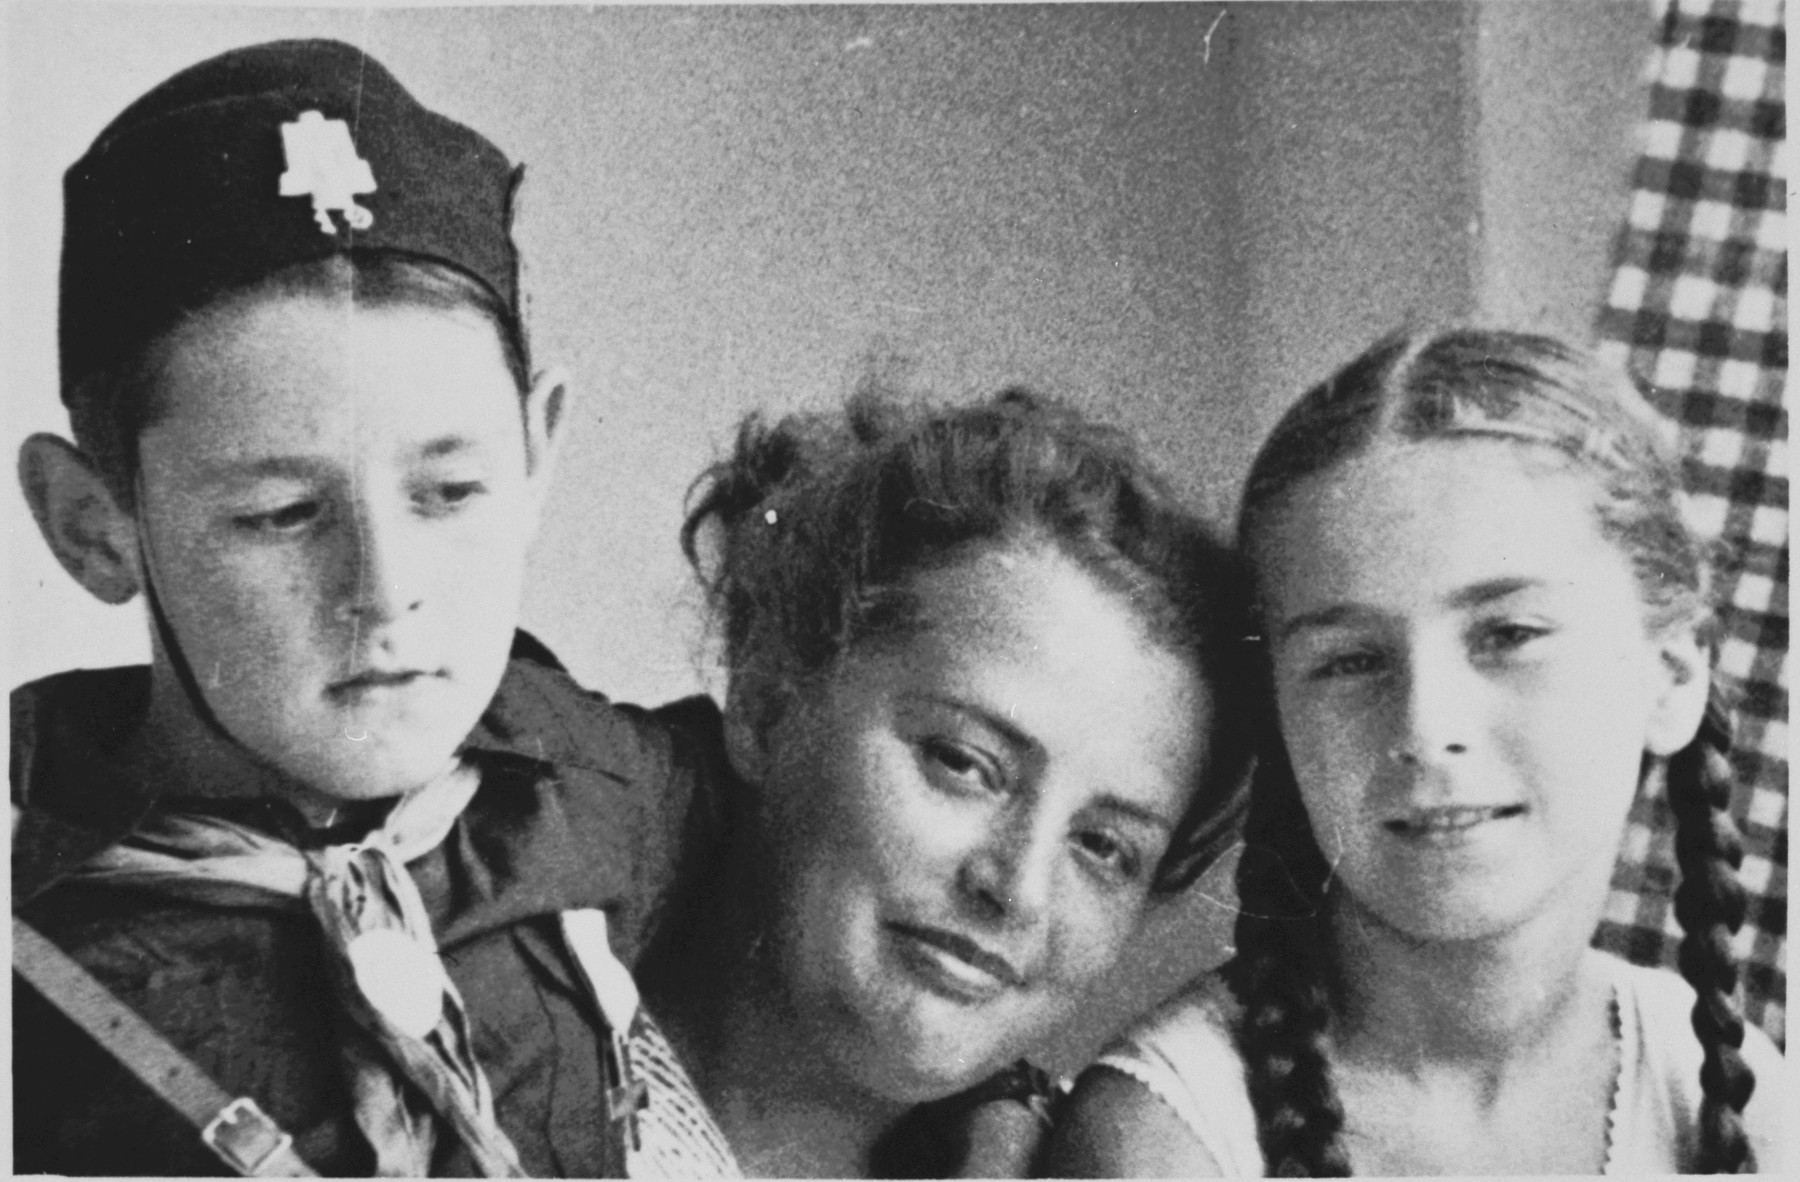 Close-up portrait of Sergio Minerbi, his mother Fanny and non-Jewish friend taken in the summer of 1938, on the eve of the Racial Laws.

Sergio Minerbi is wearing a Balilla uniform.